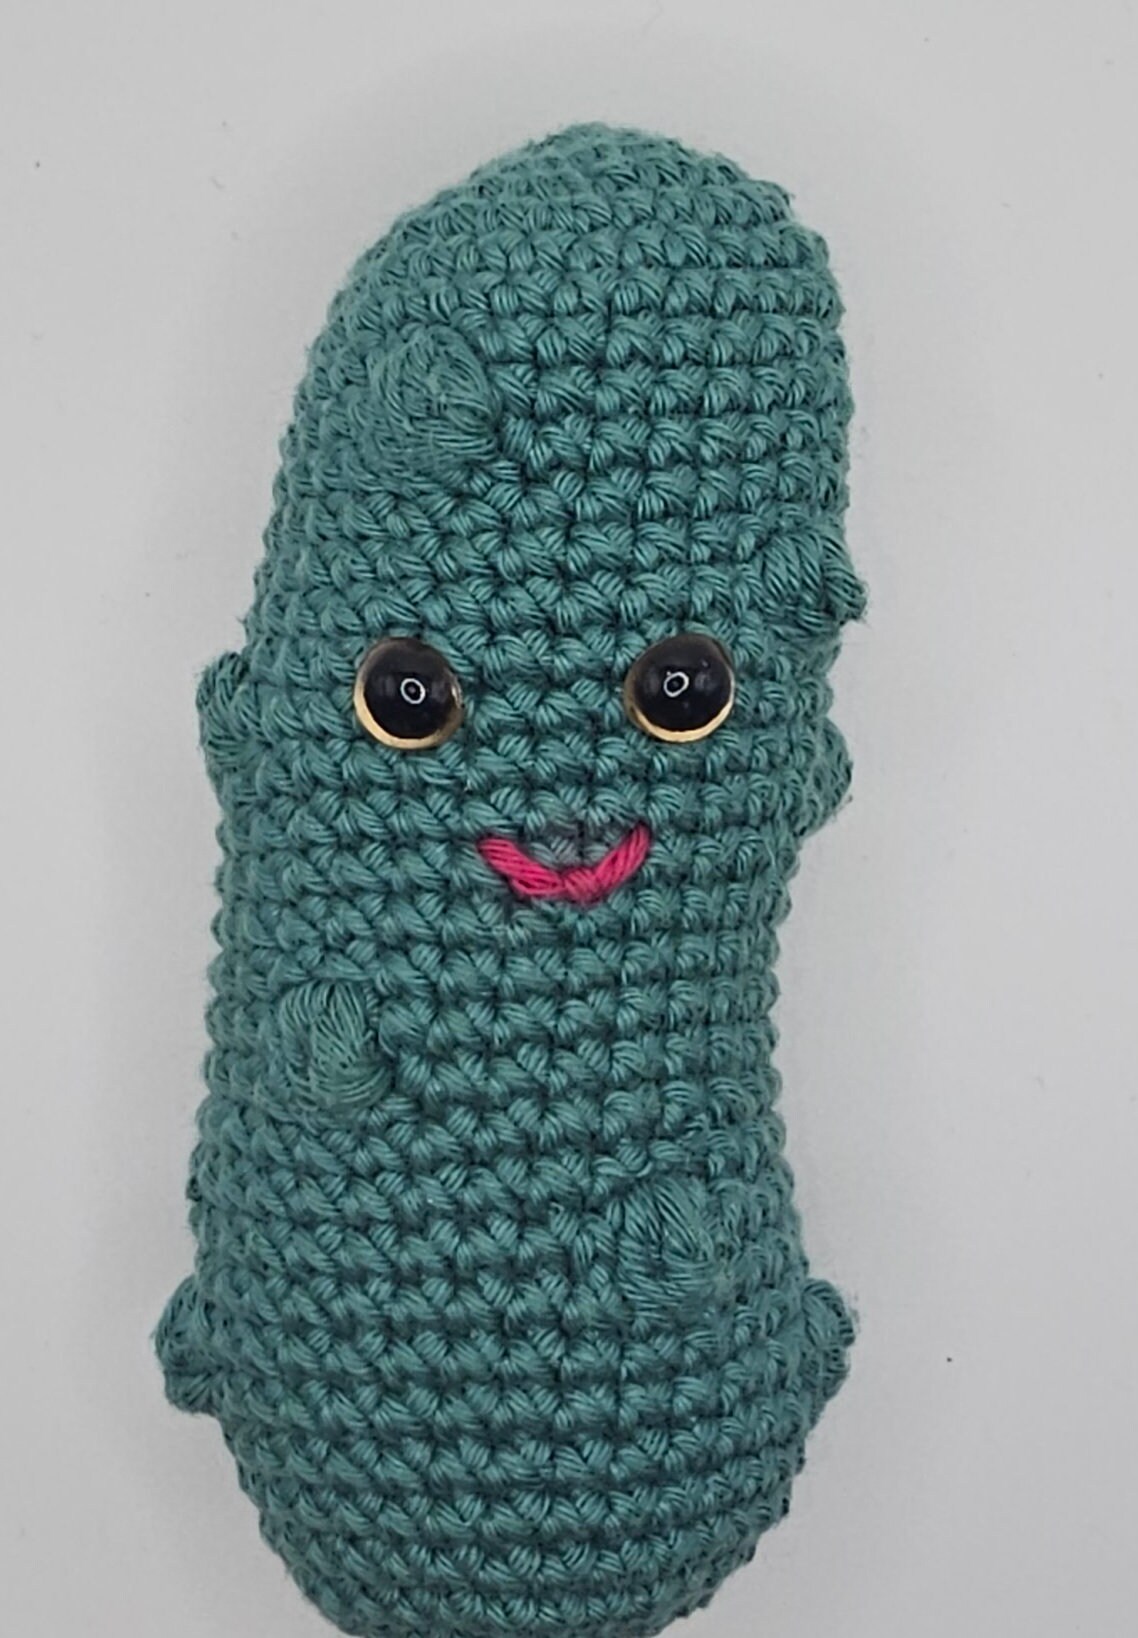 Emotional Support Pickle Crochet Pattern Instant Download PDF No Sew Kawaii  Amigurumi Play Food for Beginners, Fast, Easy, Great Gift 